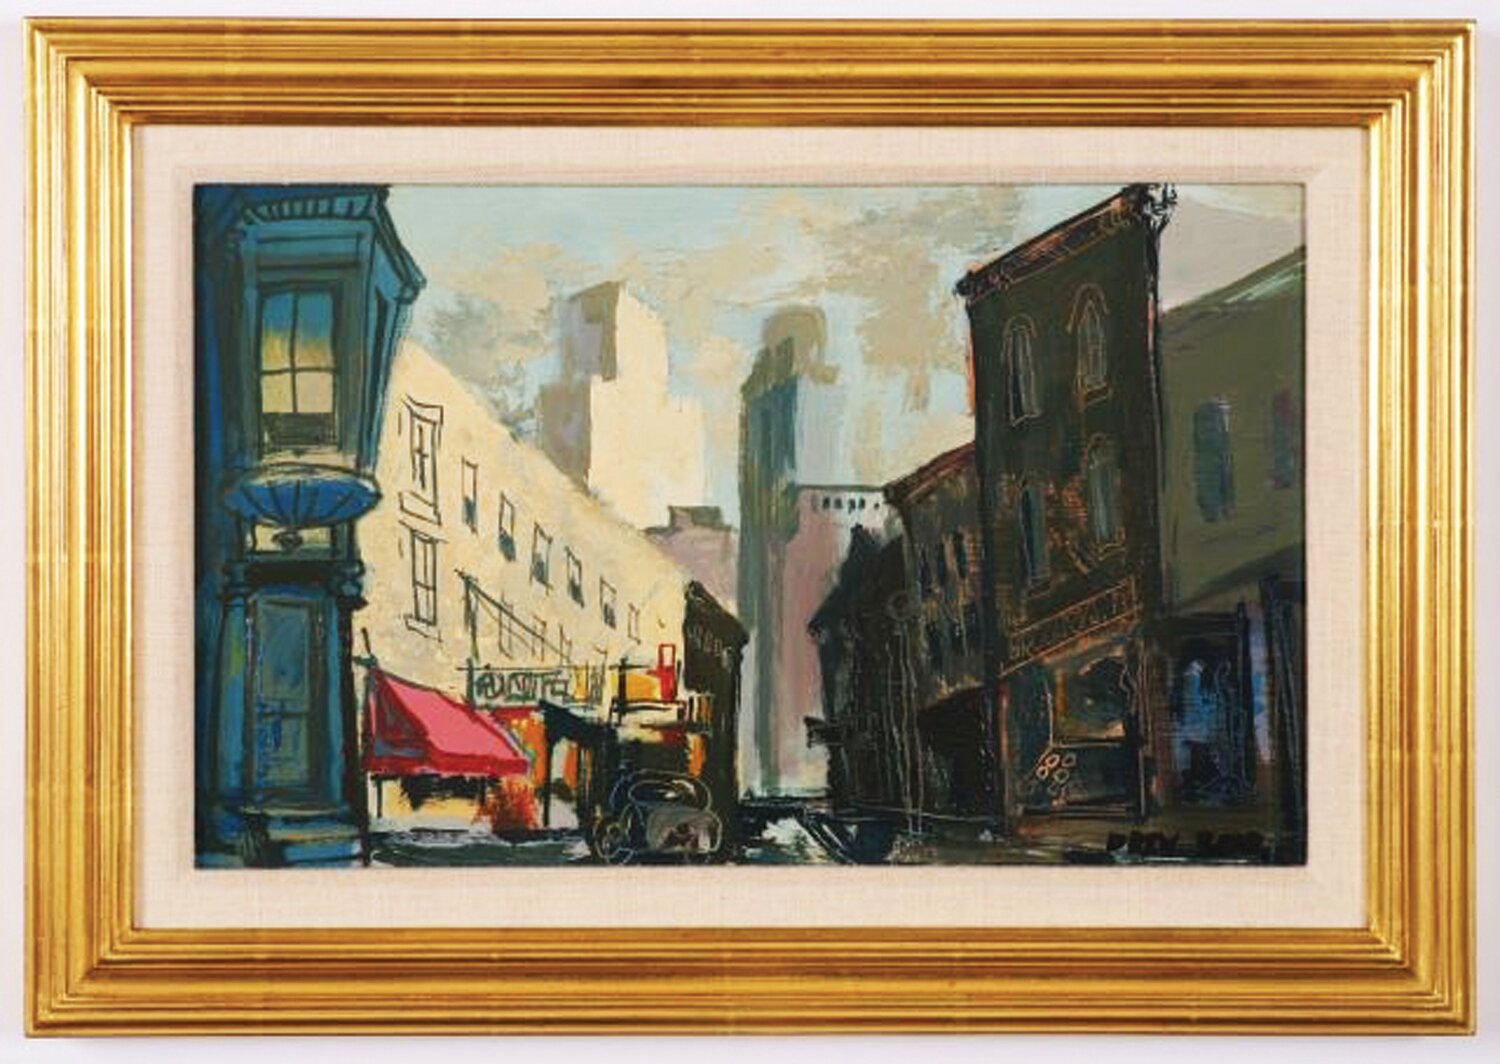 “City Street” is by Jesse Drew-Bear. It is one of eight paintings by regional women artists donated by Doylestown collector Janet Macrae.